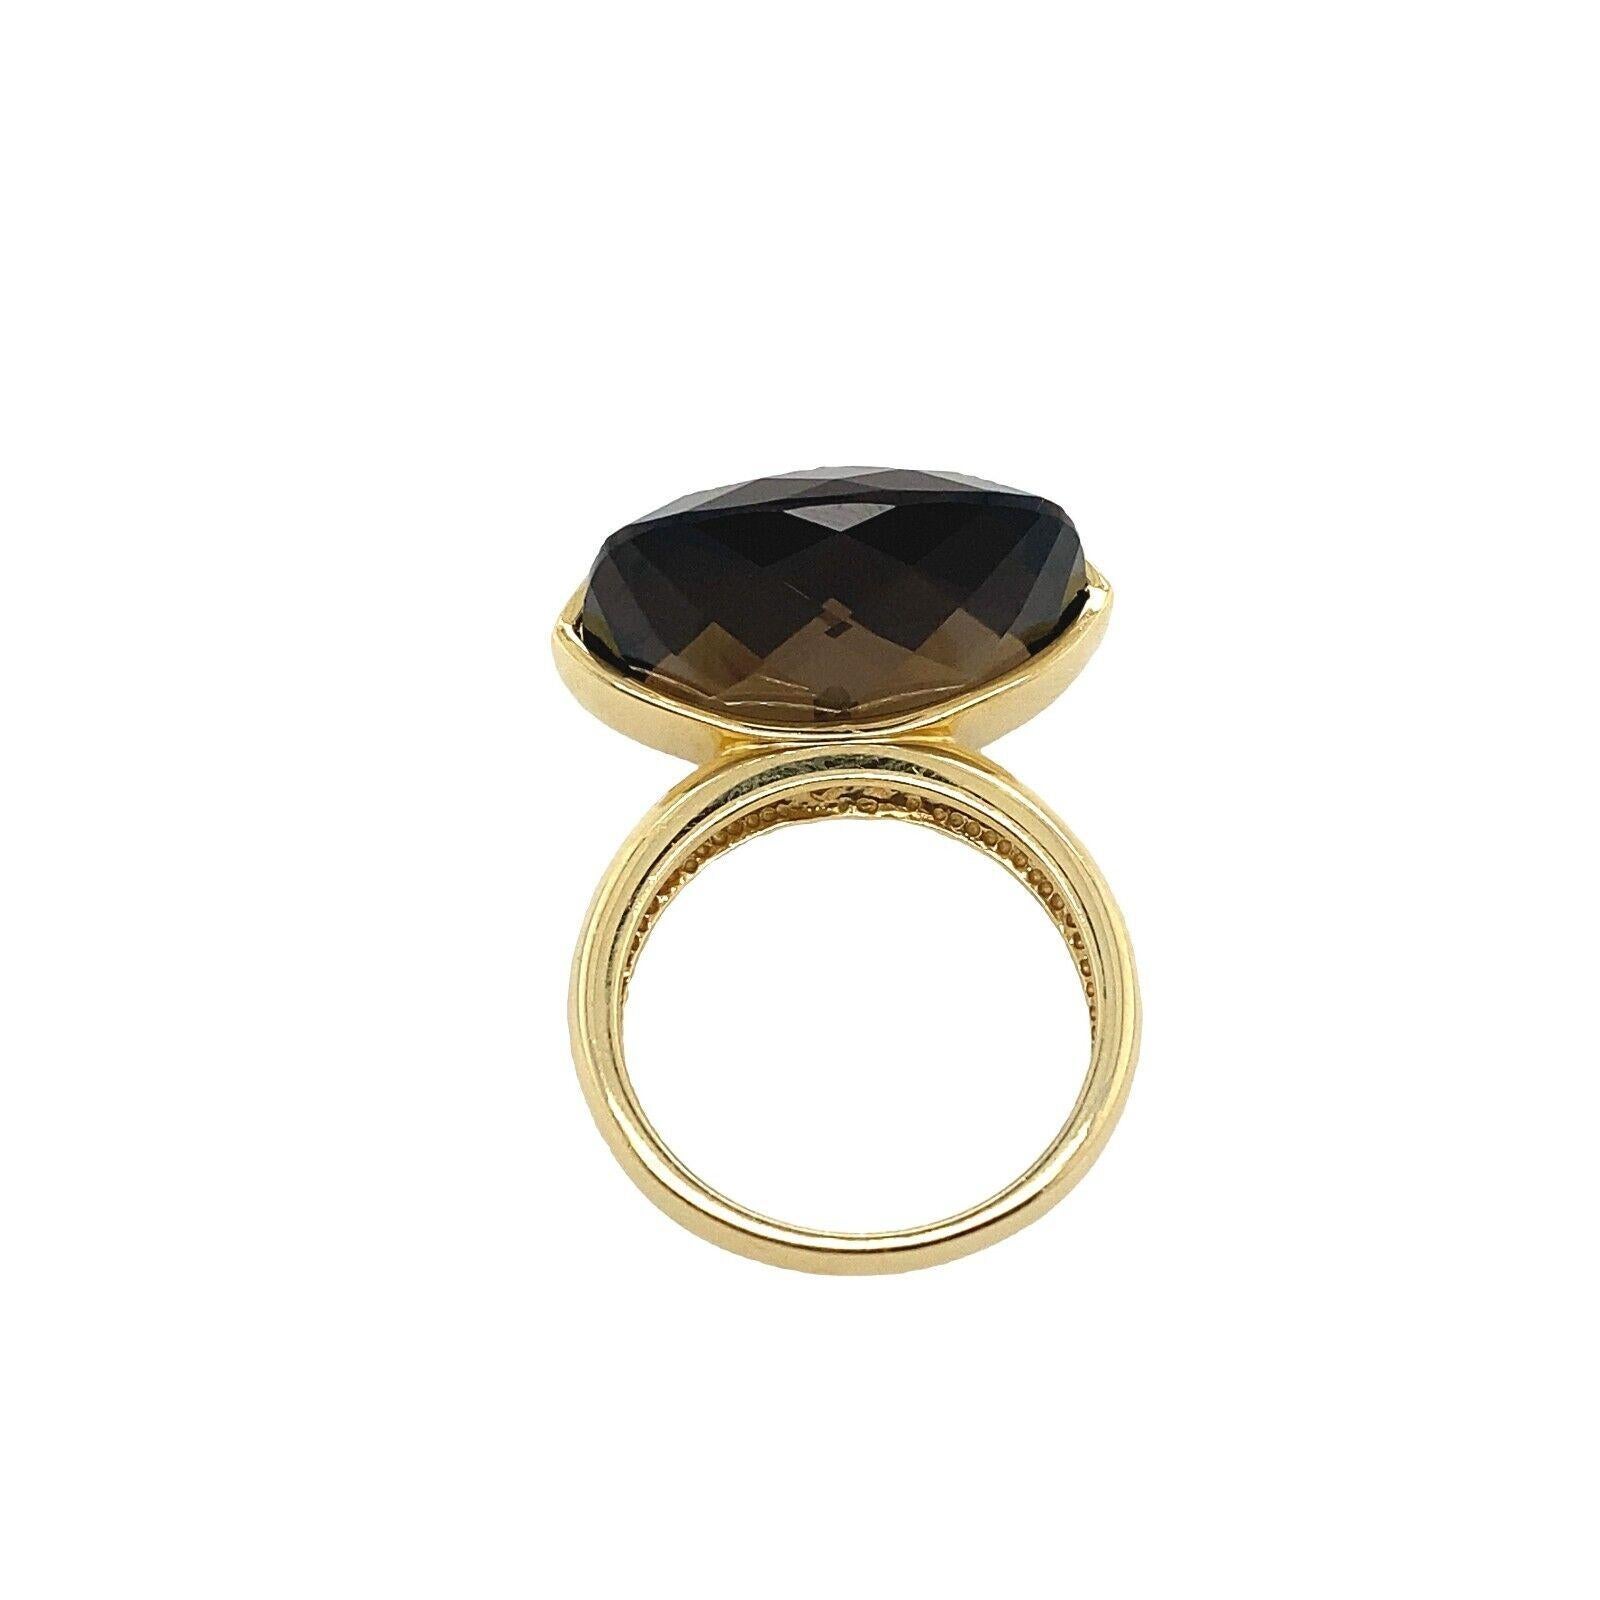 Cushion Shape Facetted Smoked Quartz Ring Set in 14ct Yellow Gold&Black Diamonds In Excellent Condition For Sale In London, GB